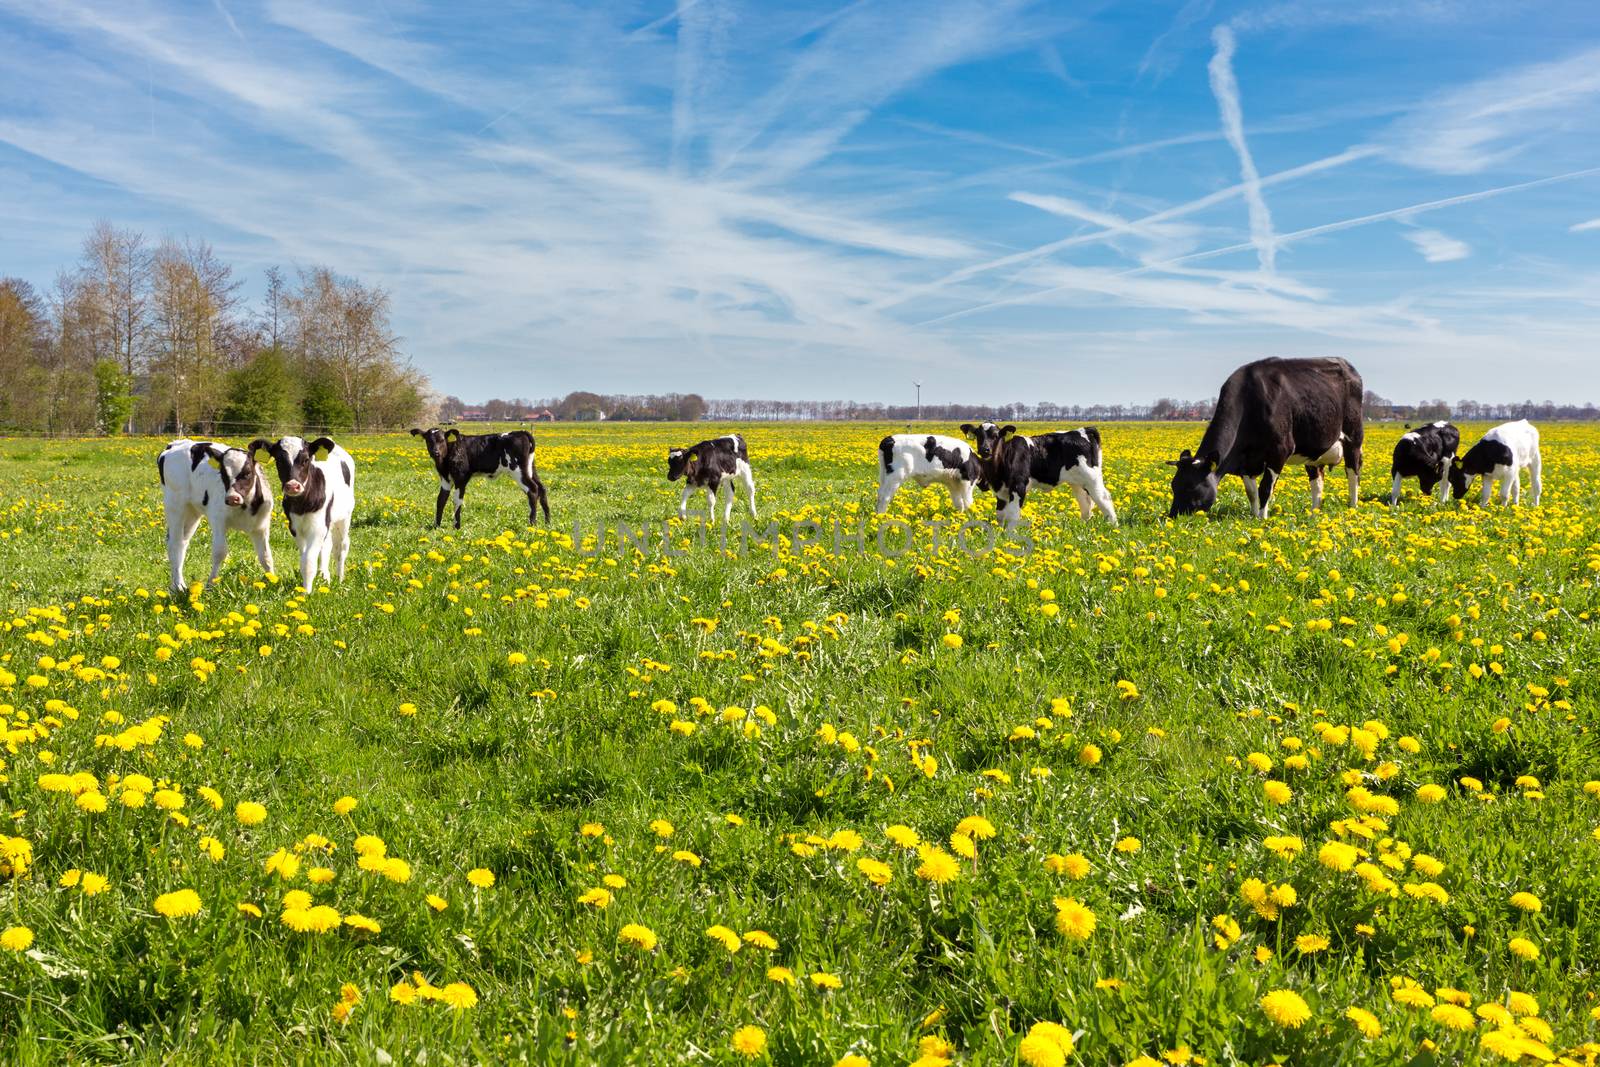 Mother cow with newborn calves in green grass with yellow dandelions during spring